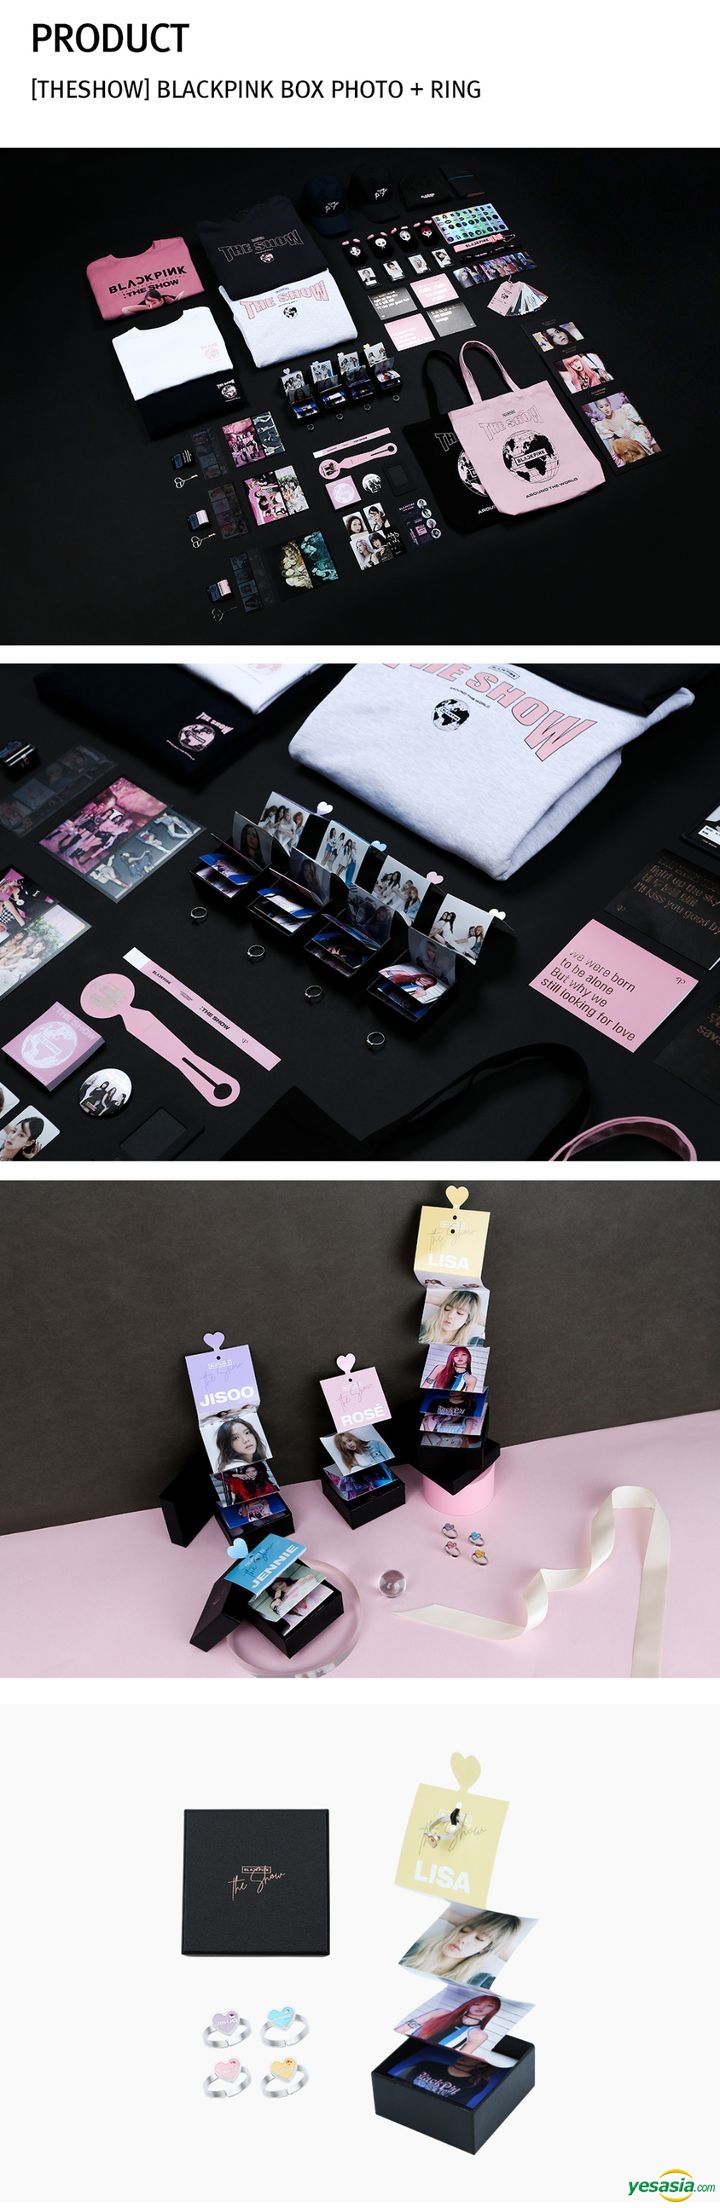 YESASIA: BLACKPINK 'The Show' Official Goods - Box Photo + Ring 